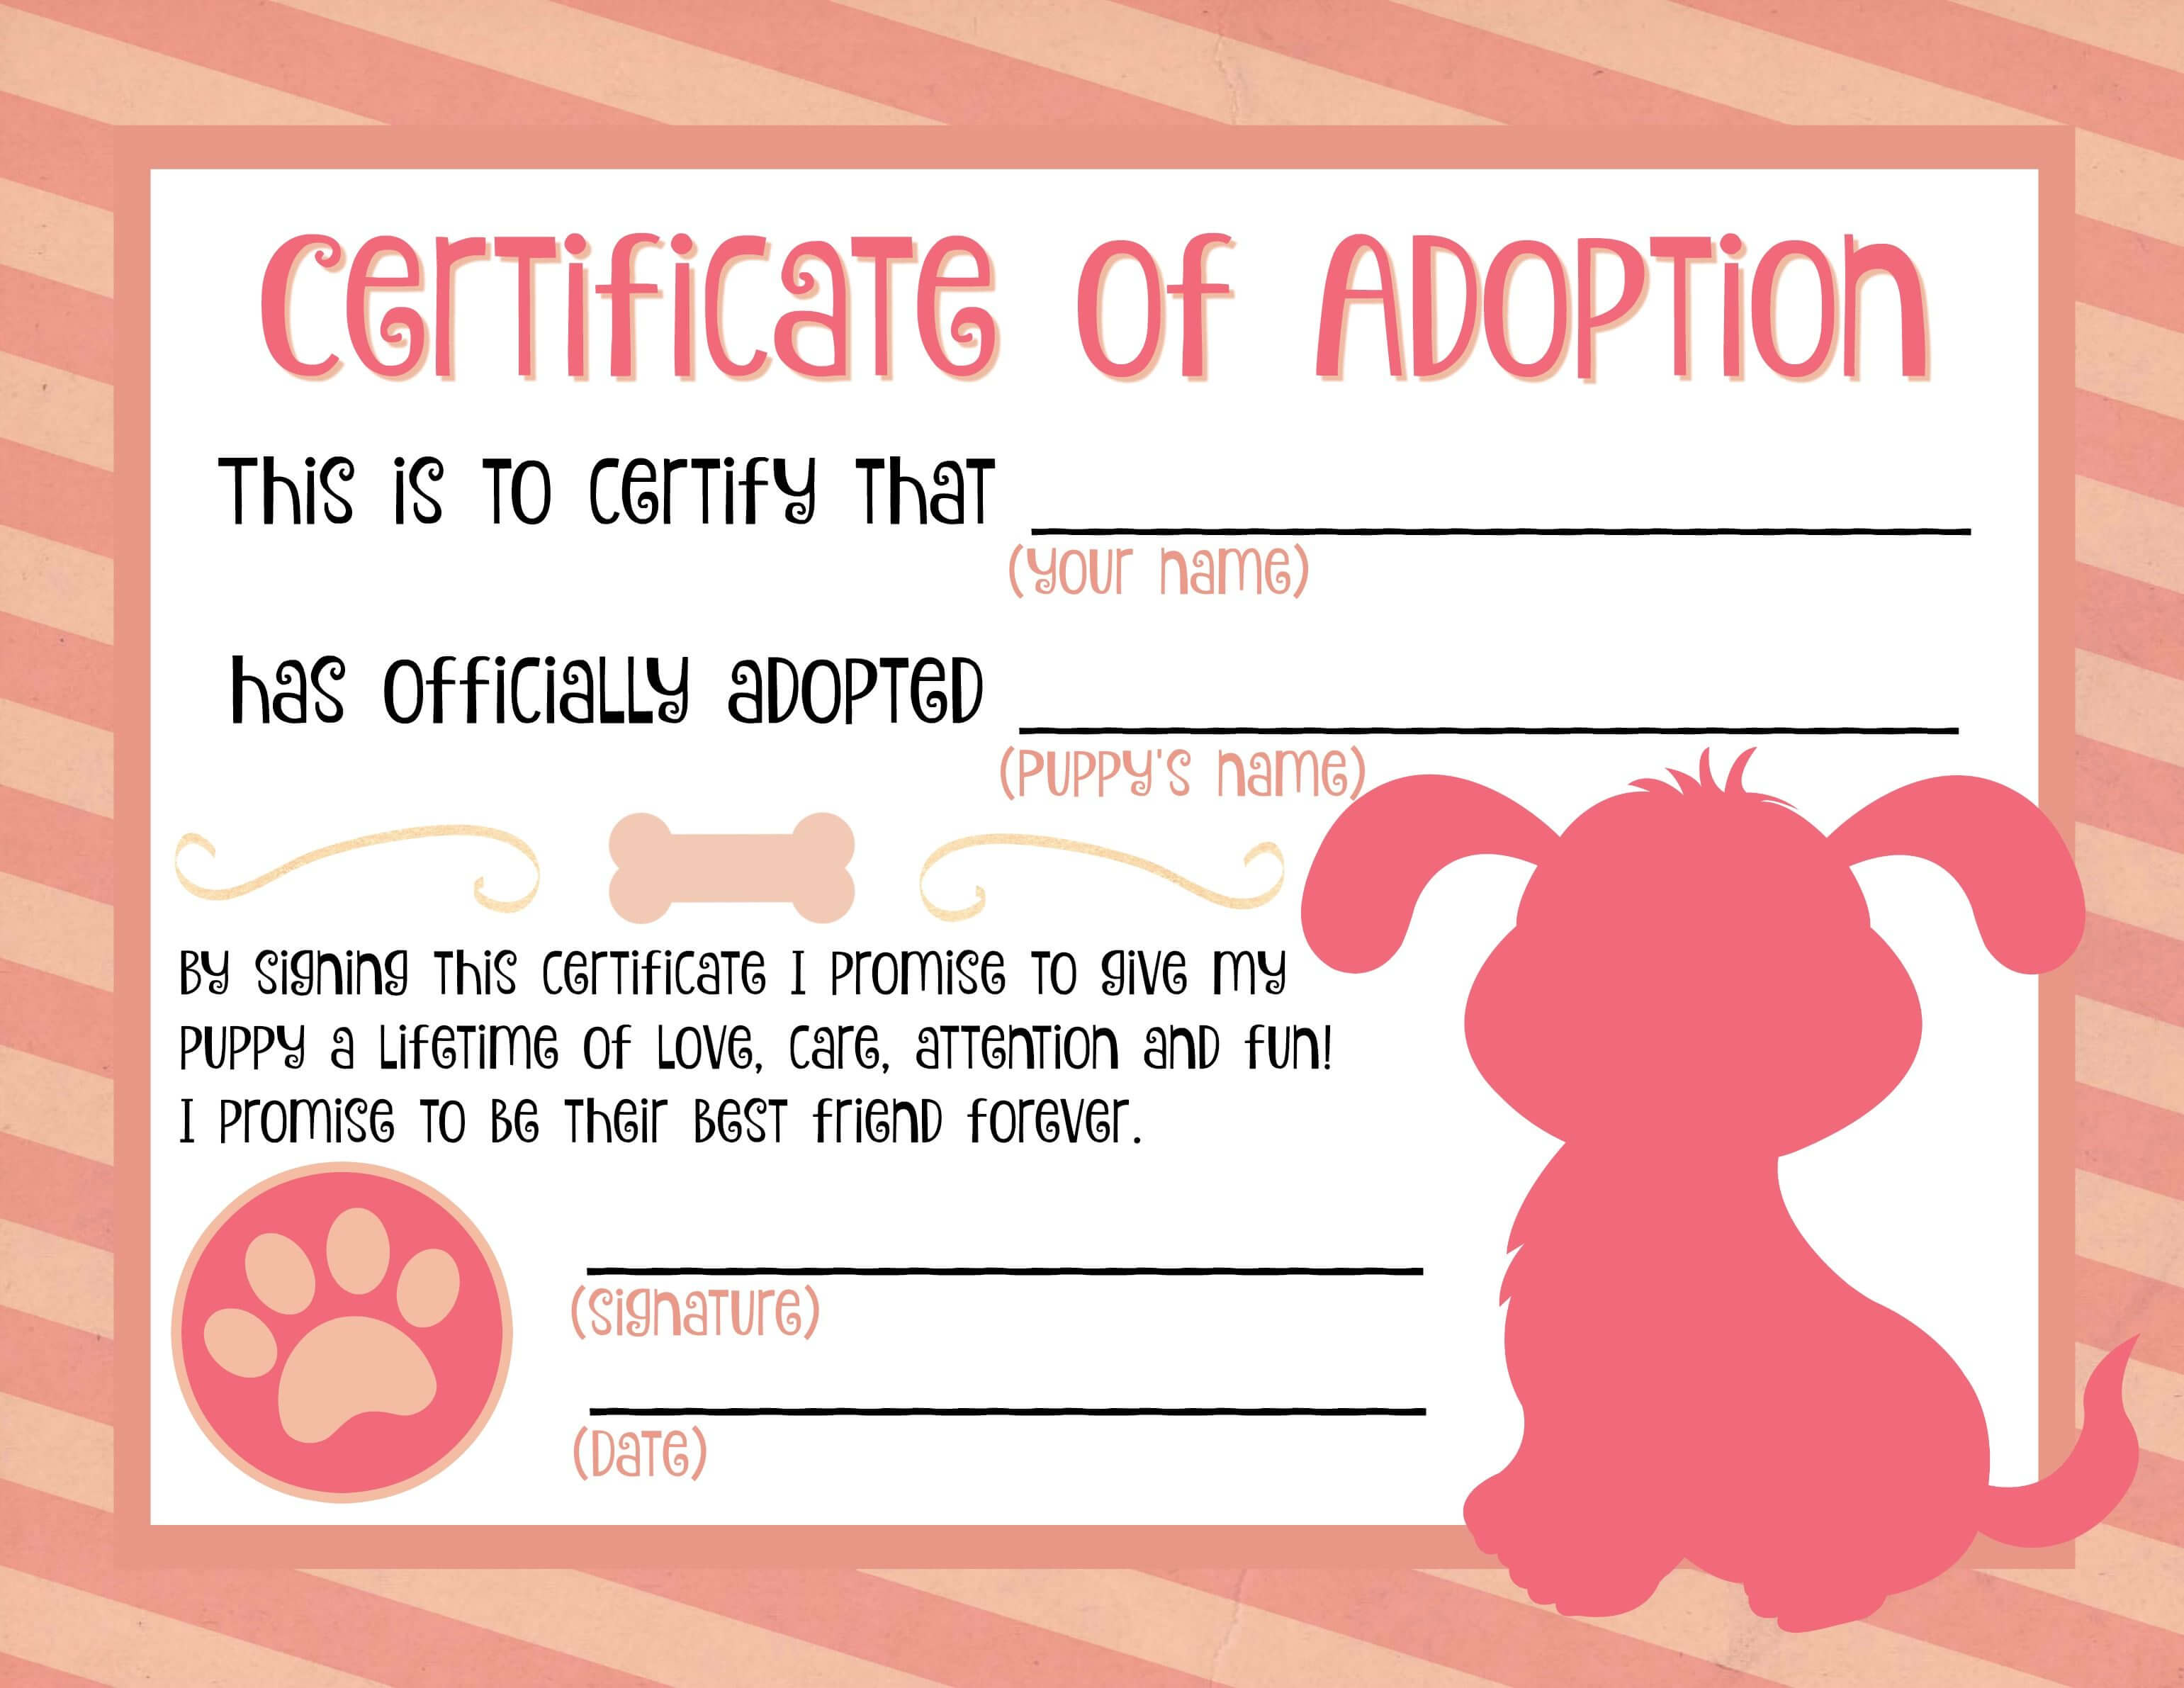 Puppy Adoption Certificate … | Party Ideas In 2019 | Puppy Regarding Toy Adoption Certificate Template